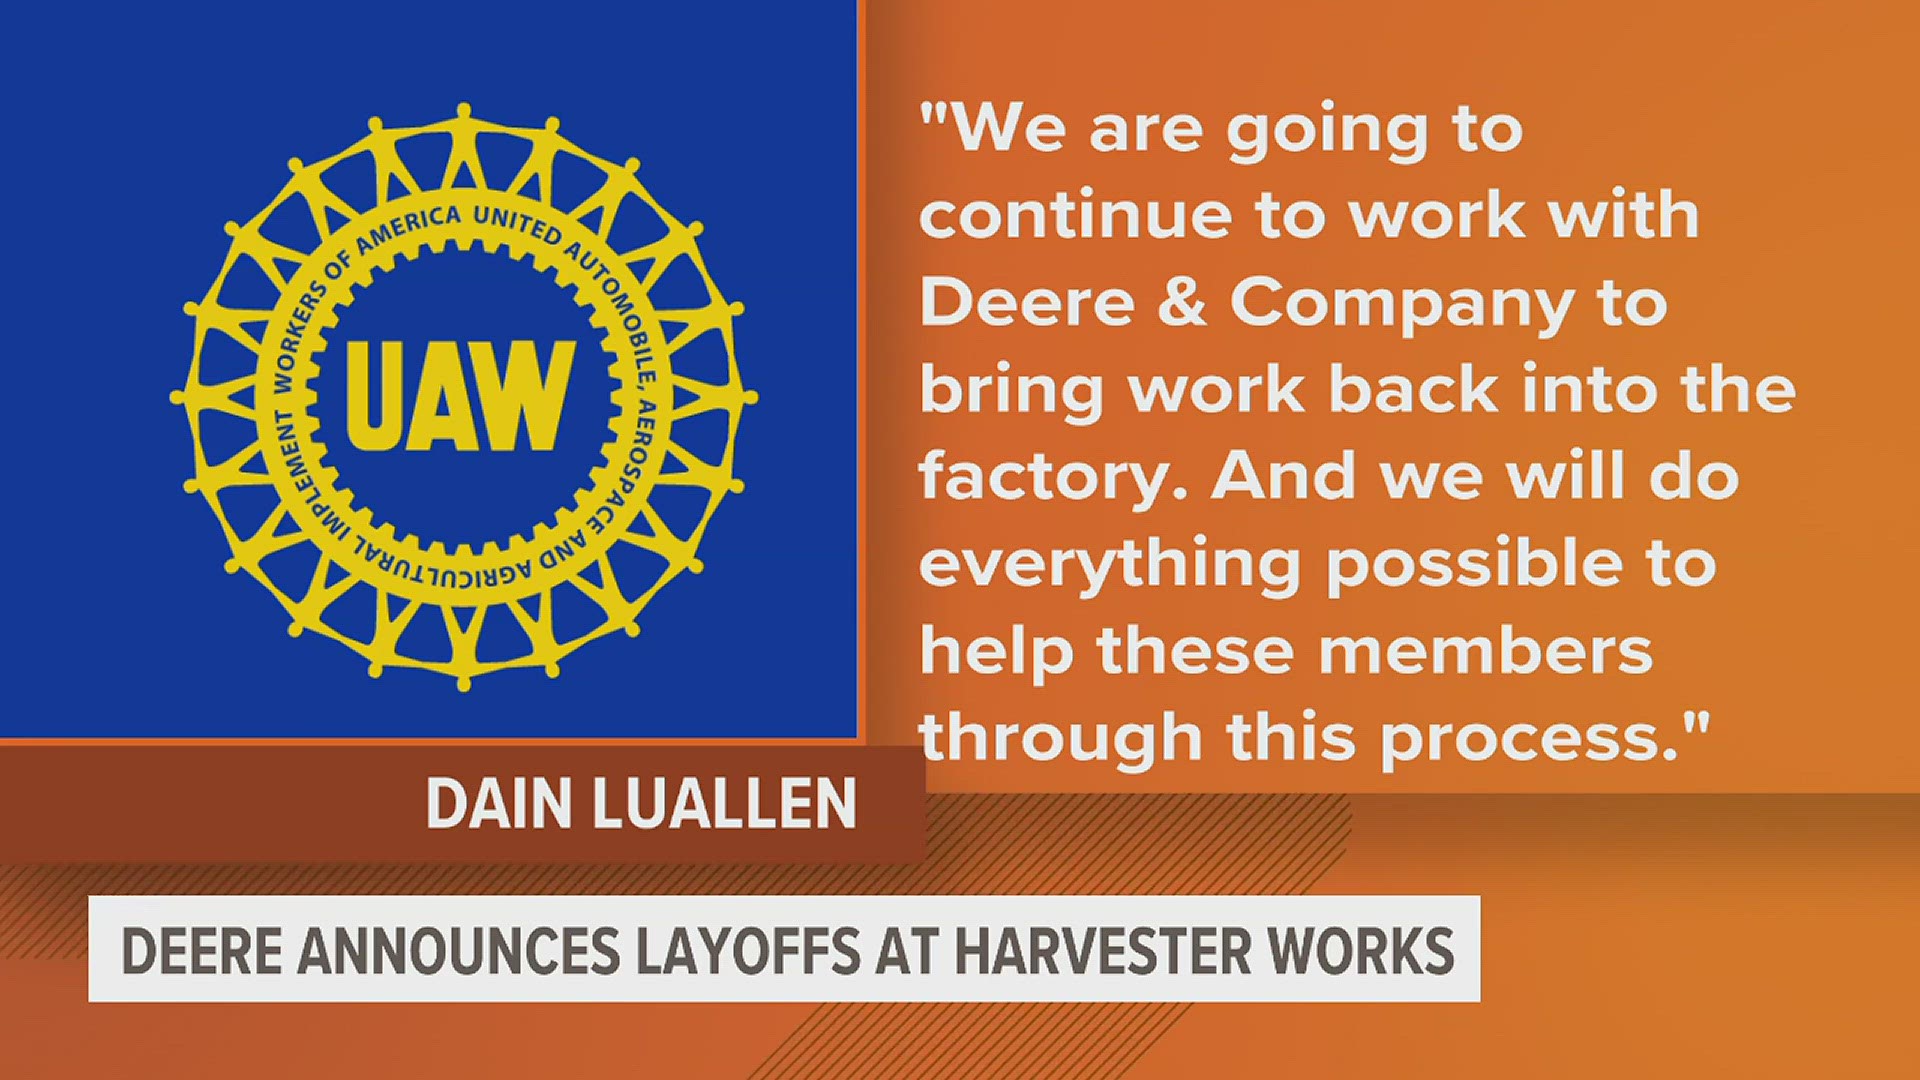 In a statement to News 8, UAW Local 865 president Dain Luallen said the union will work with Deere and Company to bring work back to the factory.